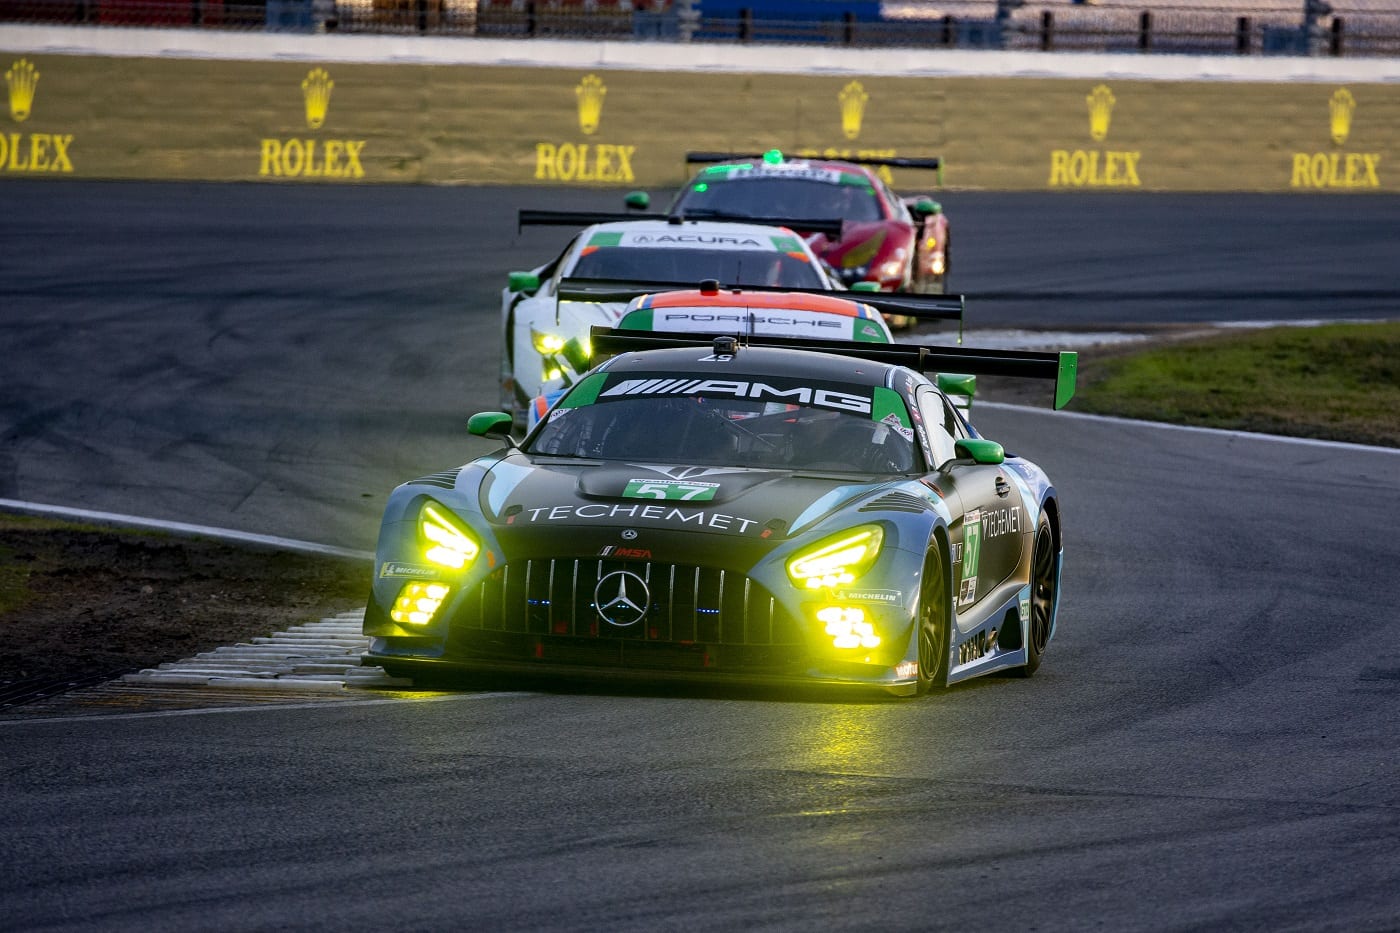 Mercedes-Amg Gt3 Wallpapers